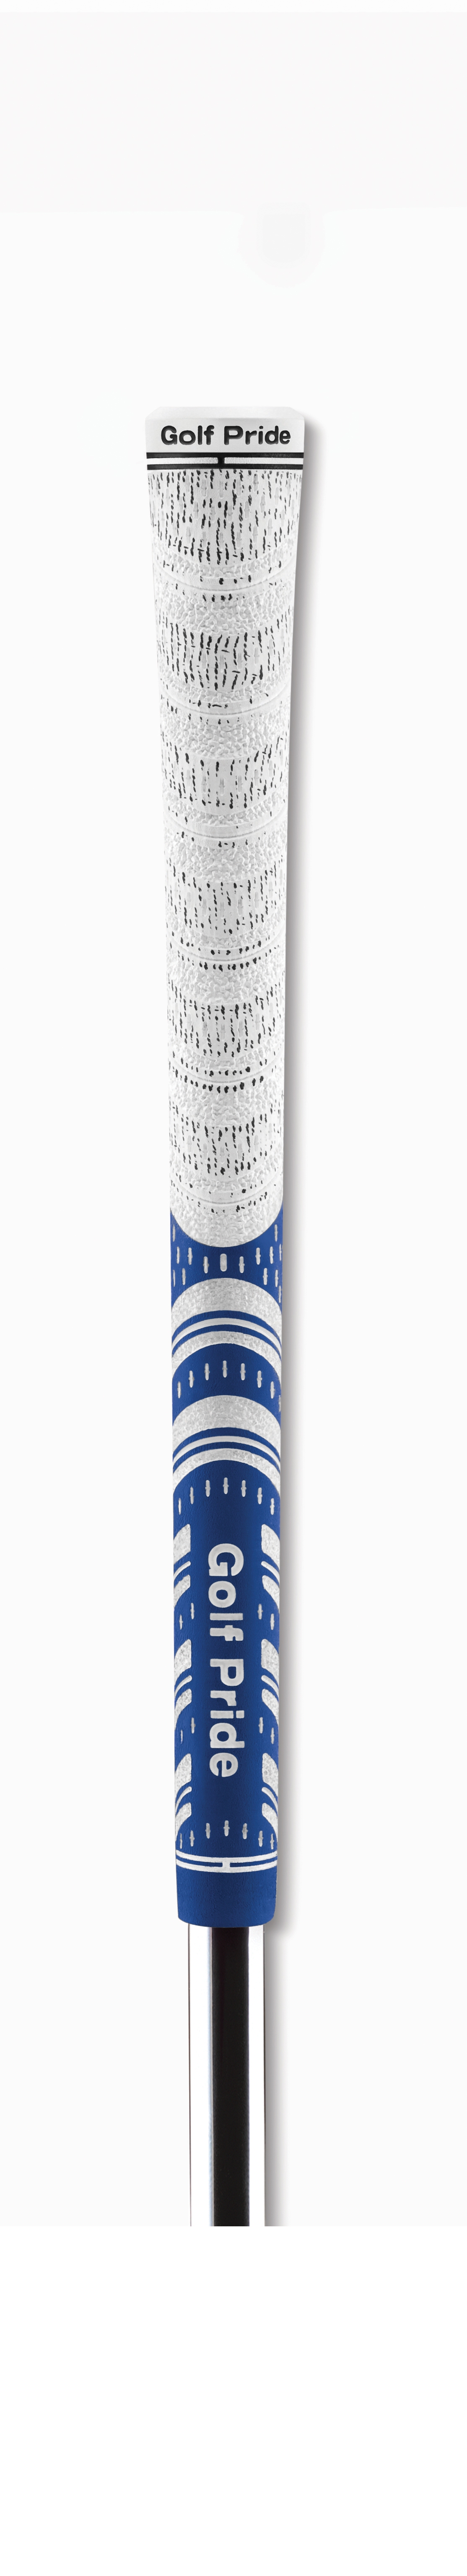 New Whiteout grip from Golf Pride